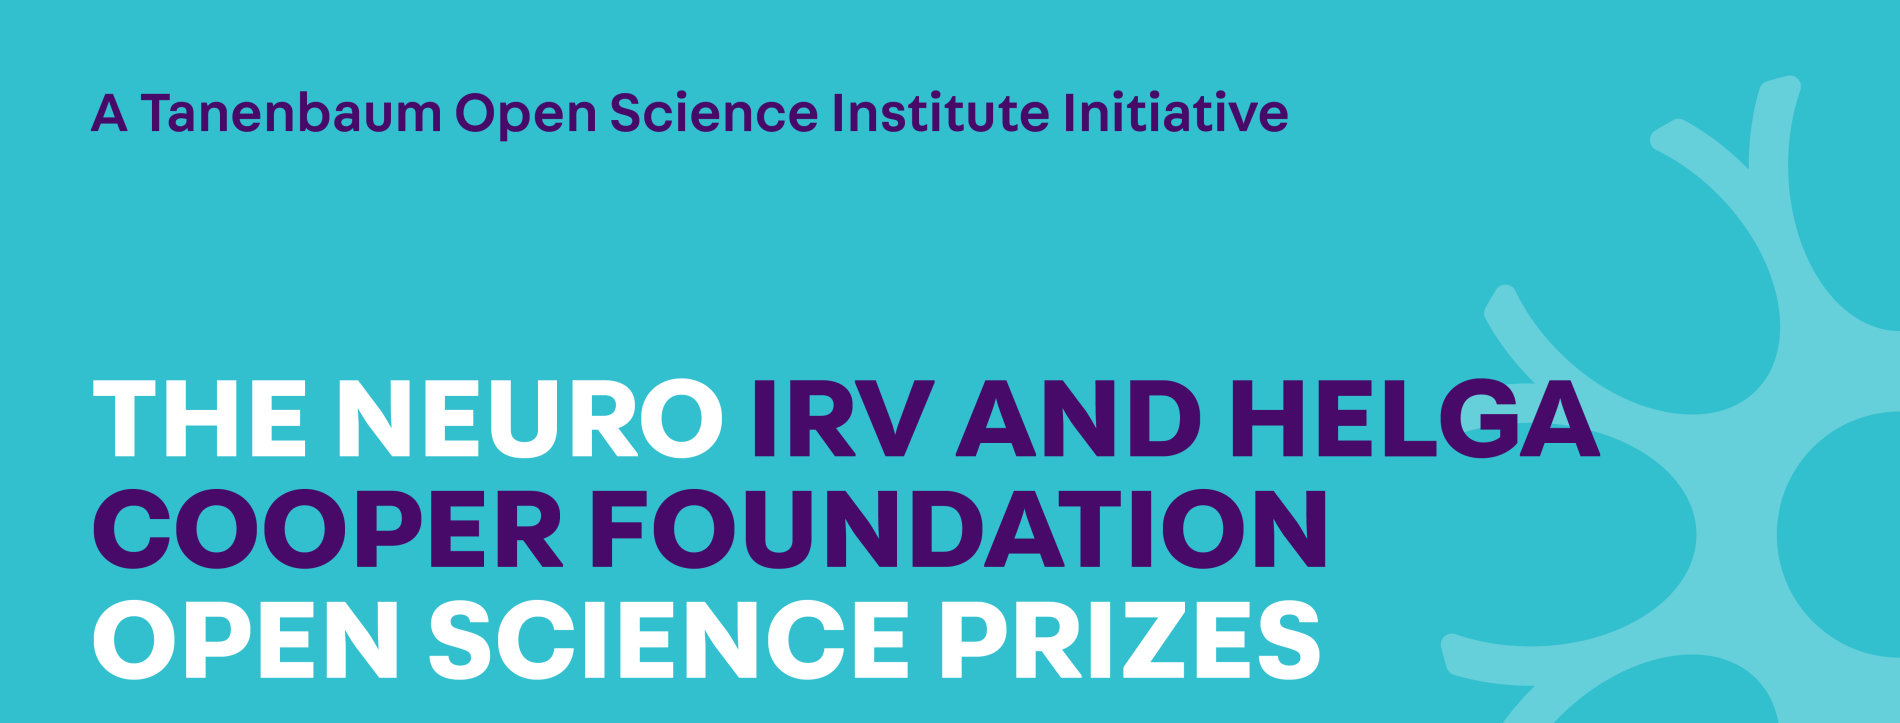 the Neuro-Irv and Helga Cooper Foundation Open Science Prizes